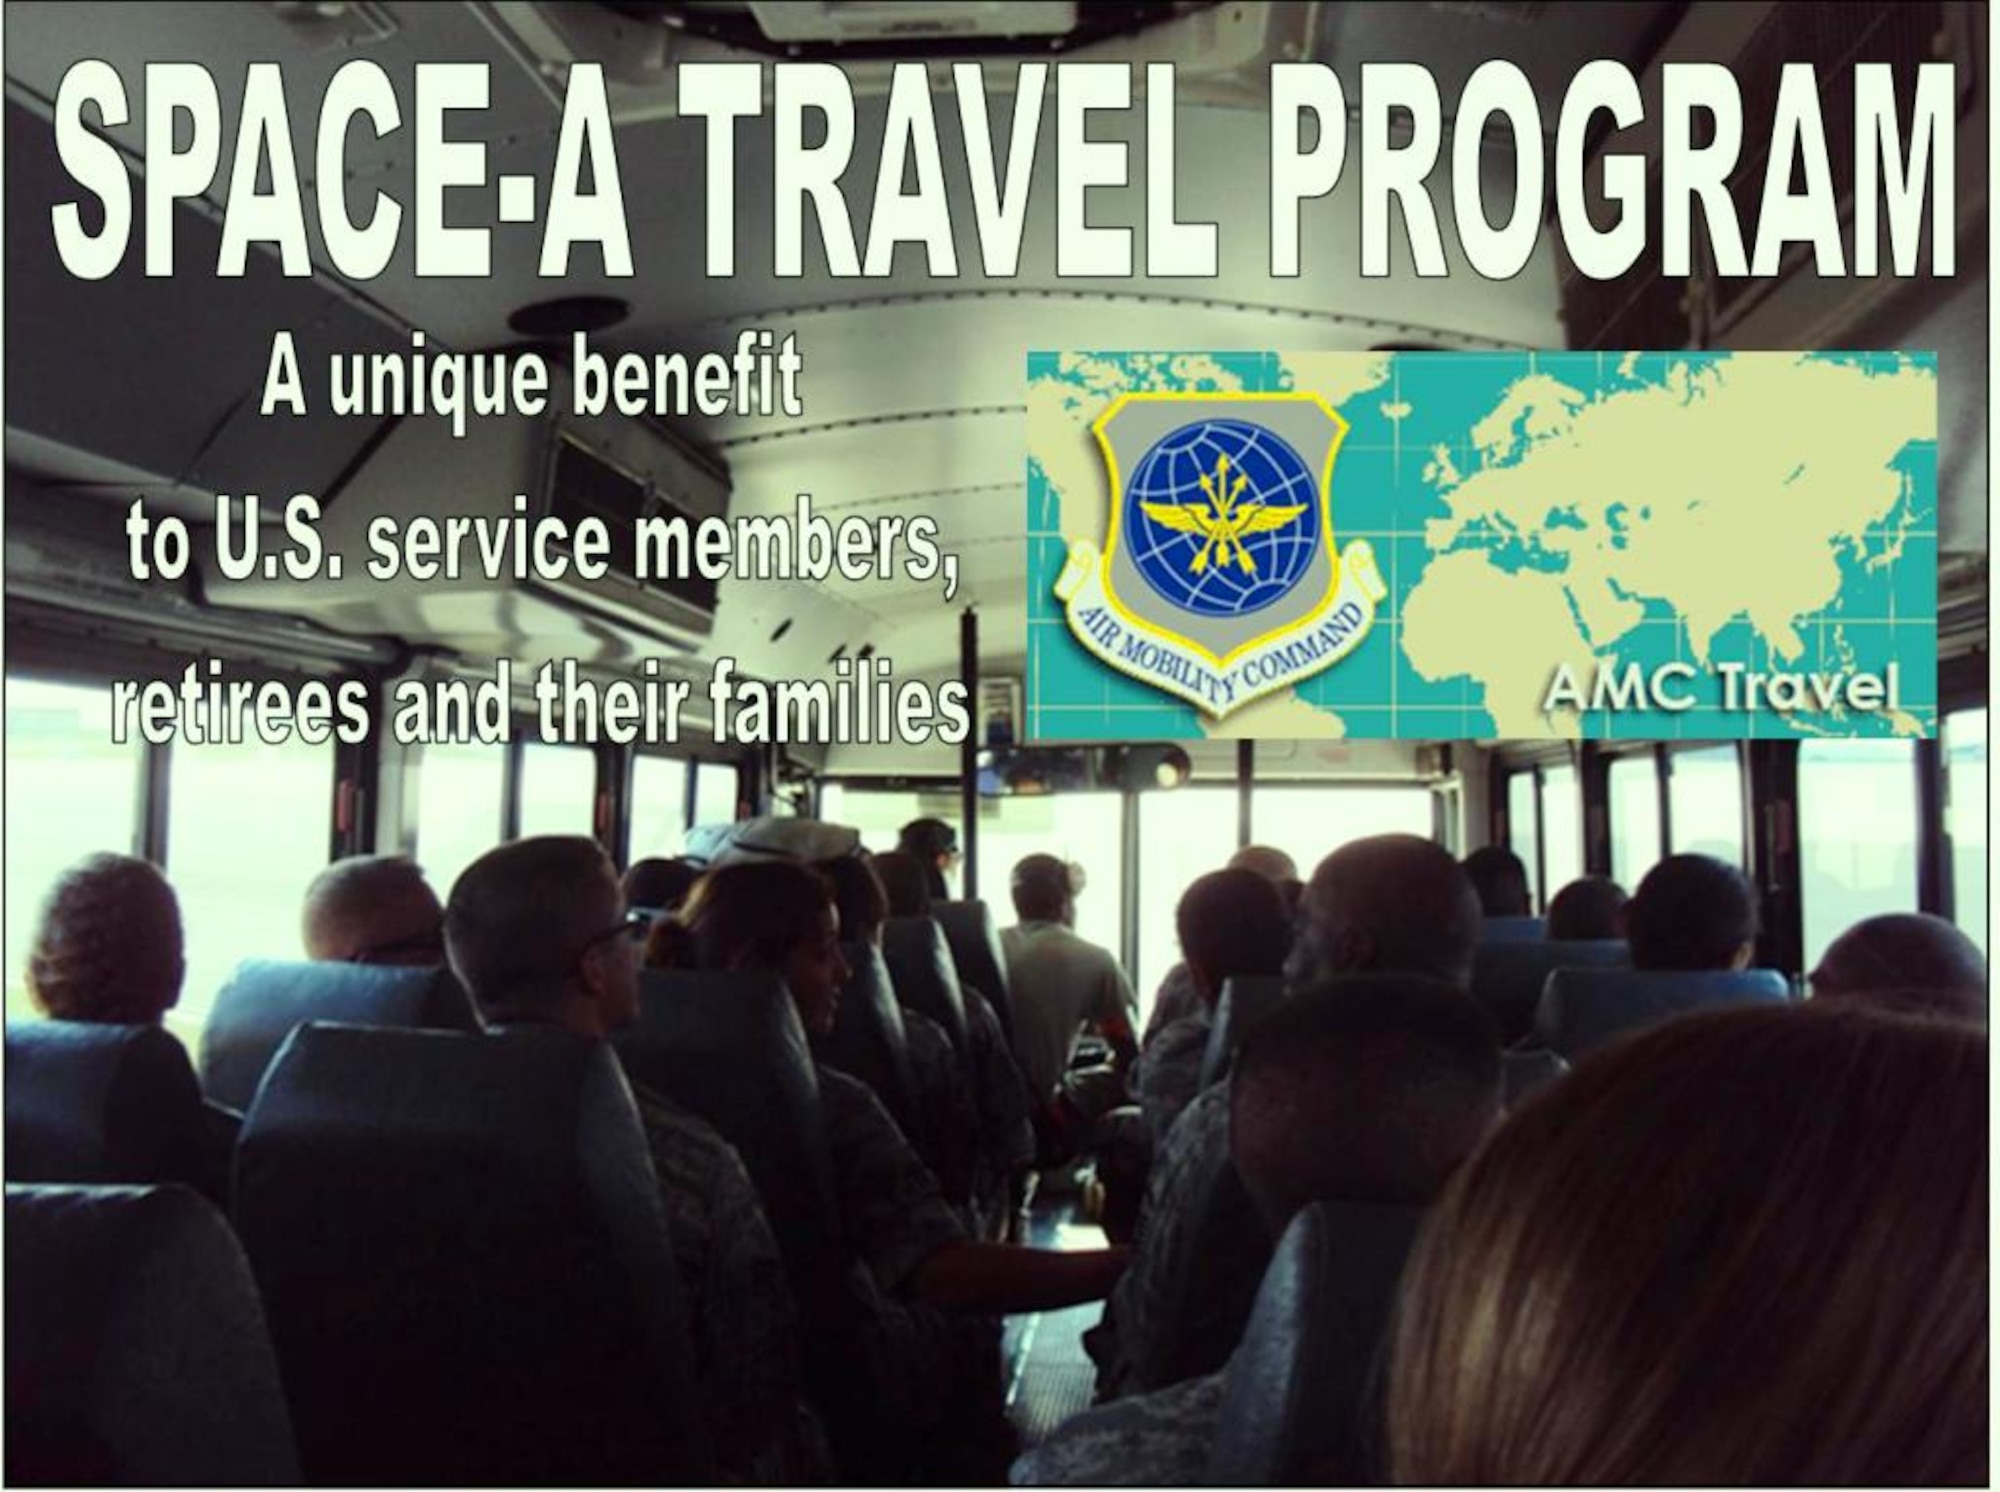 Every day, around the world, hundreds of military and military-contracted commercial aircraft travel the world delivering troops and cargo. These missions allow hundreds of thousands of military personnel, retirees, family members, and other Department of Defense-eligible travelers to fly at almost no cost, courtesy of the DOD Space-Available (Space-A) Travel Program. (U.S. Air Force Graphic Illustration/Master Sgt. Scott T. Sturkol)